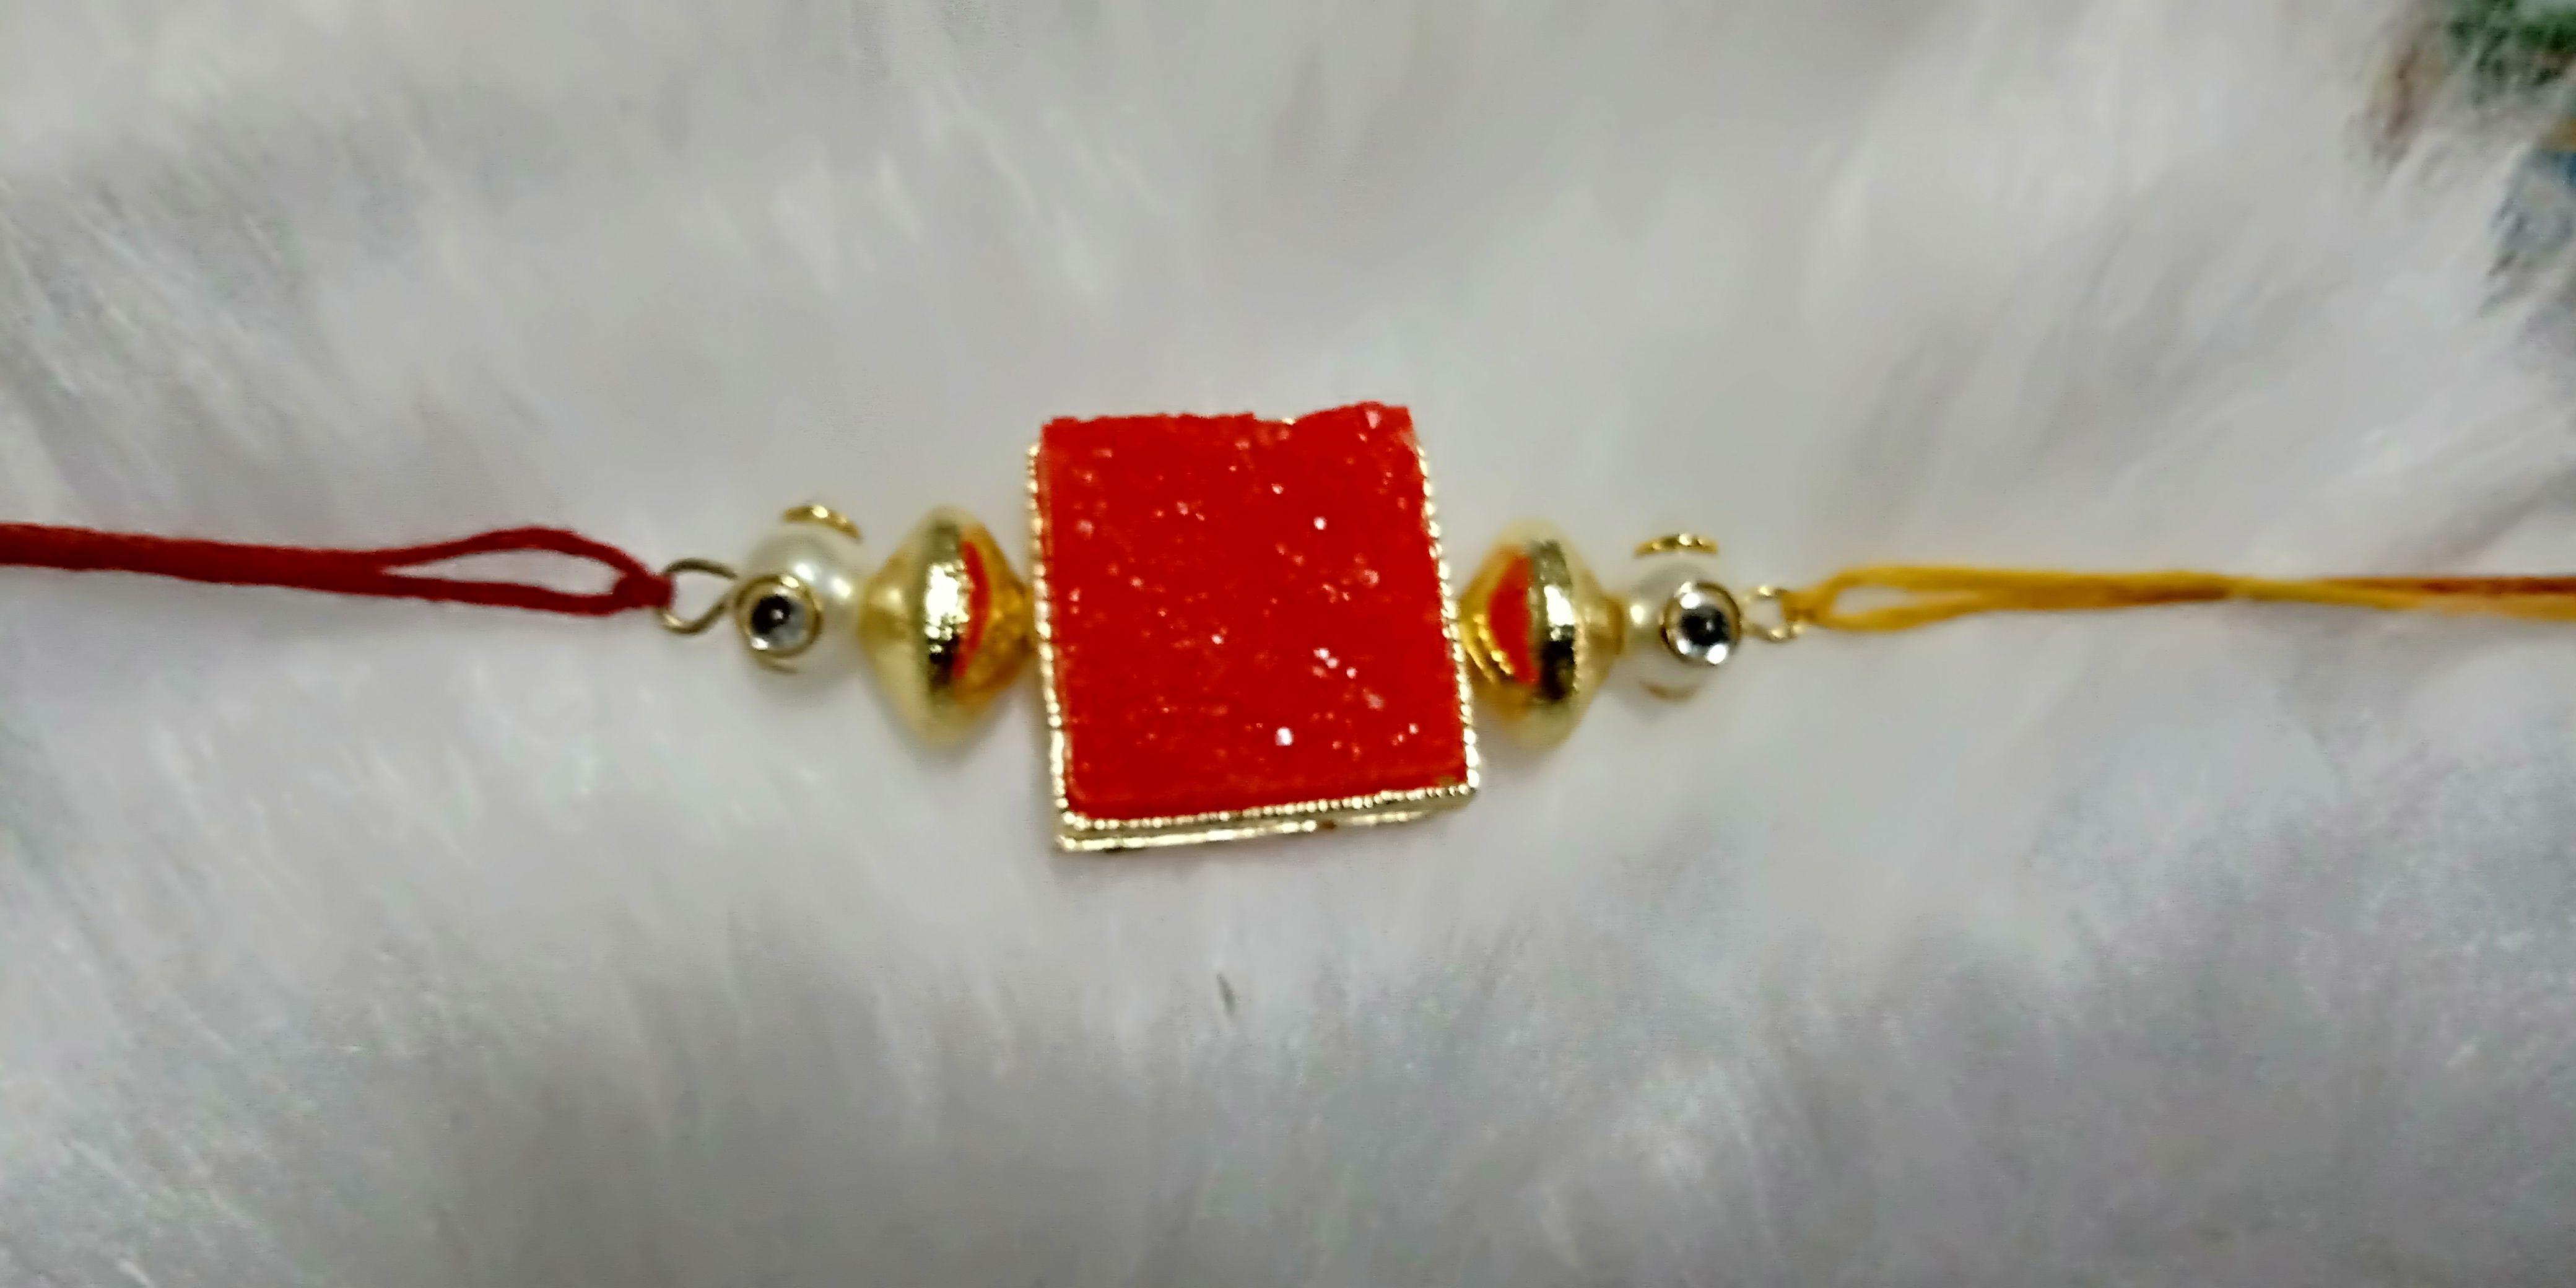 Red Square with White Oval Logo - Pretty Red Square Piece with Golden Oval Brush Finished Beads and ...